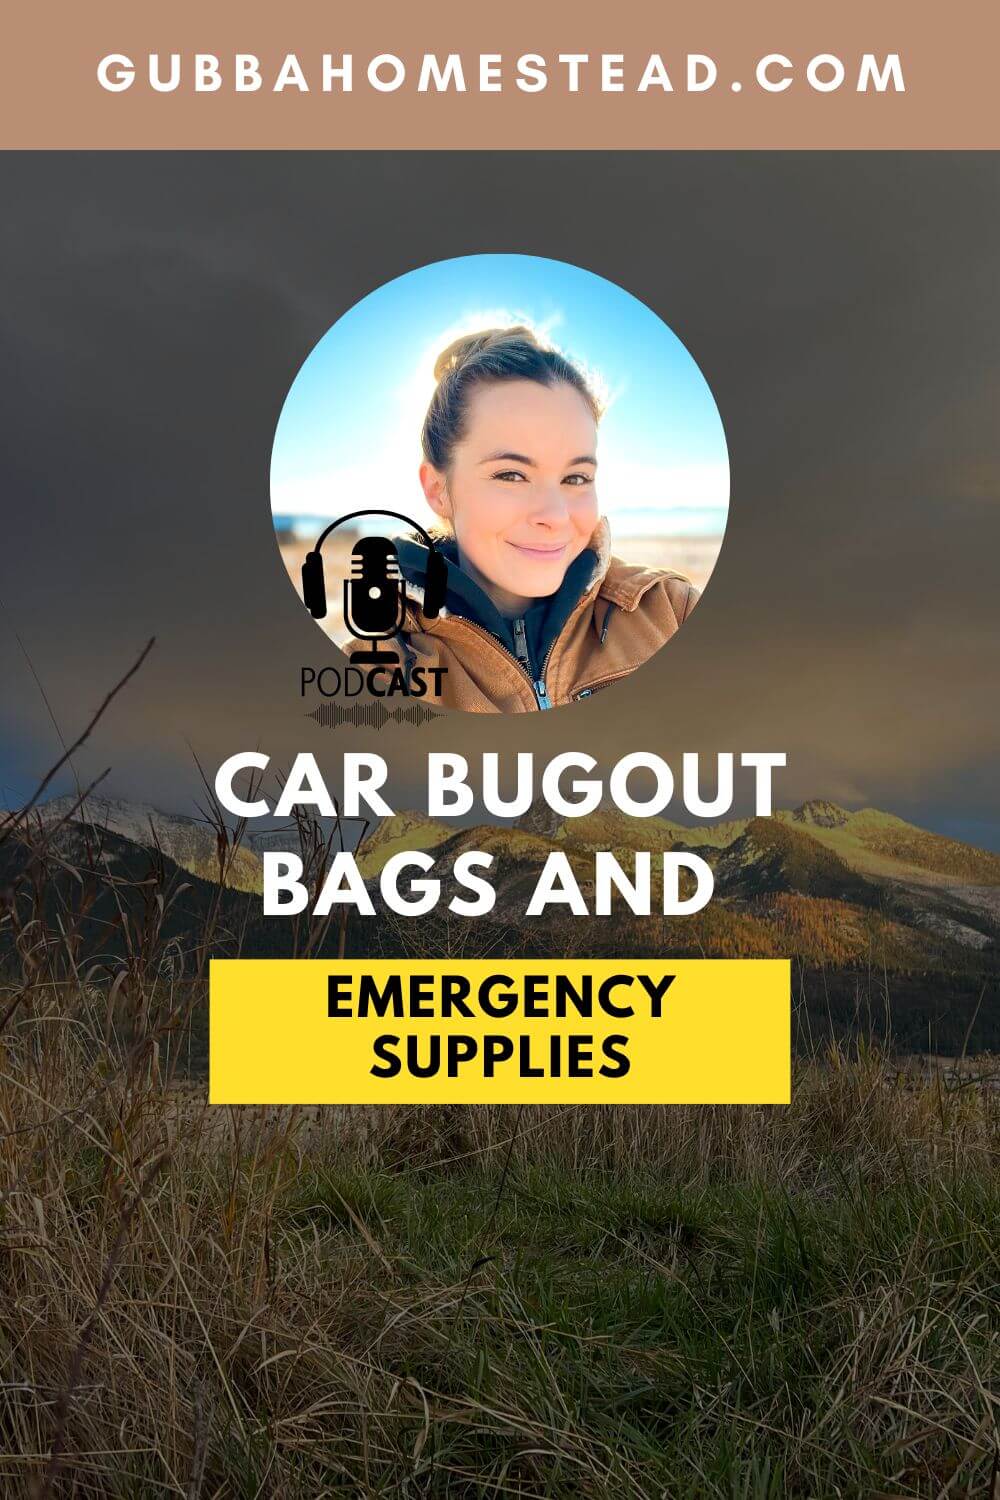 Car Bugout Bags and Emergency Supplies